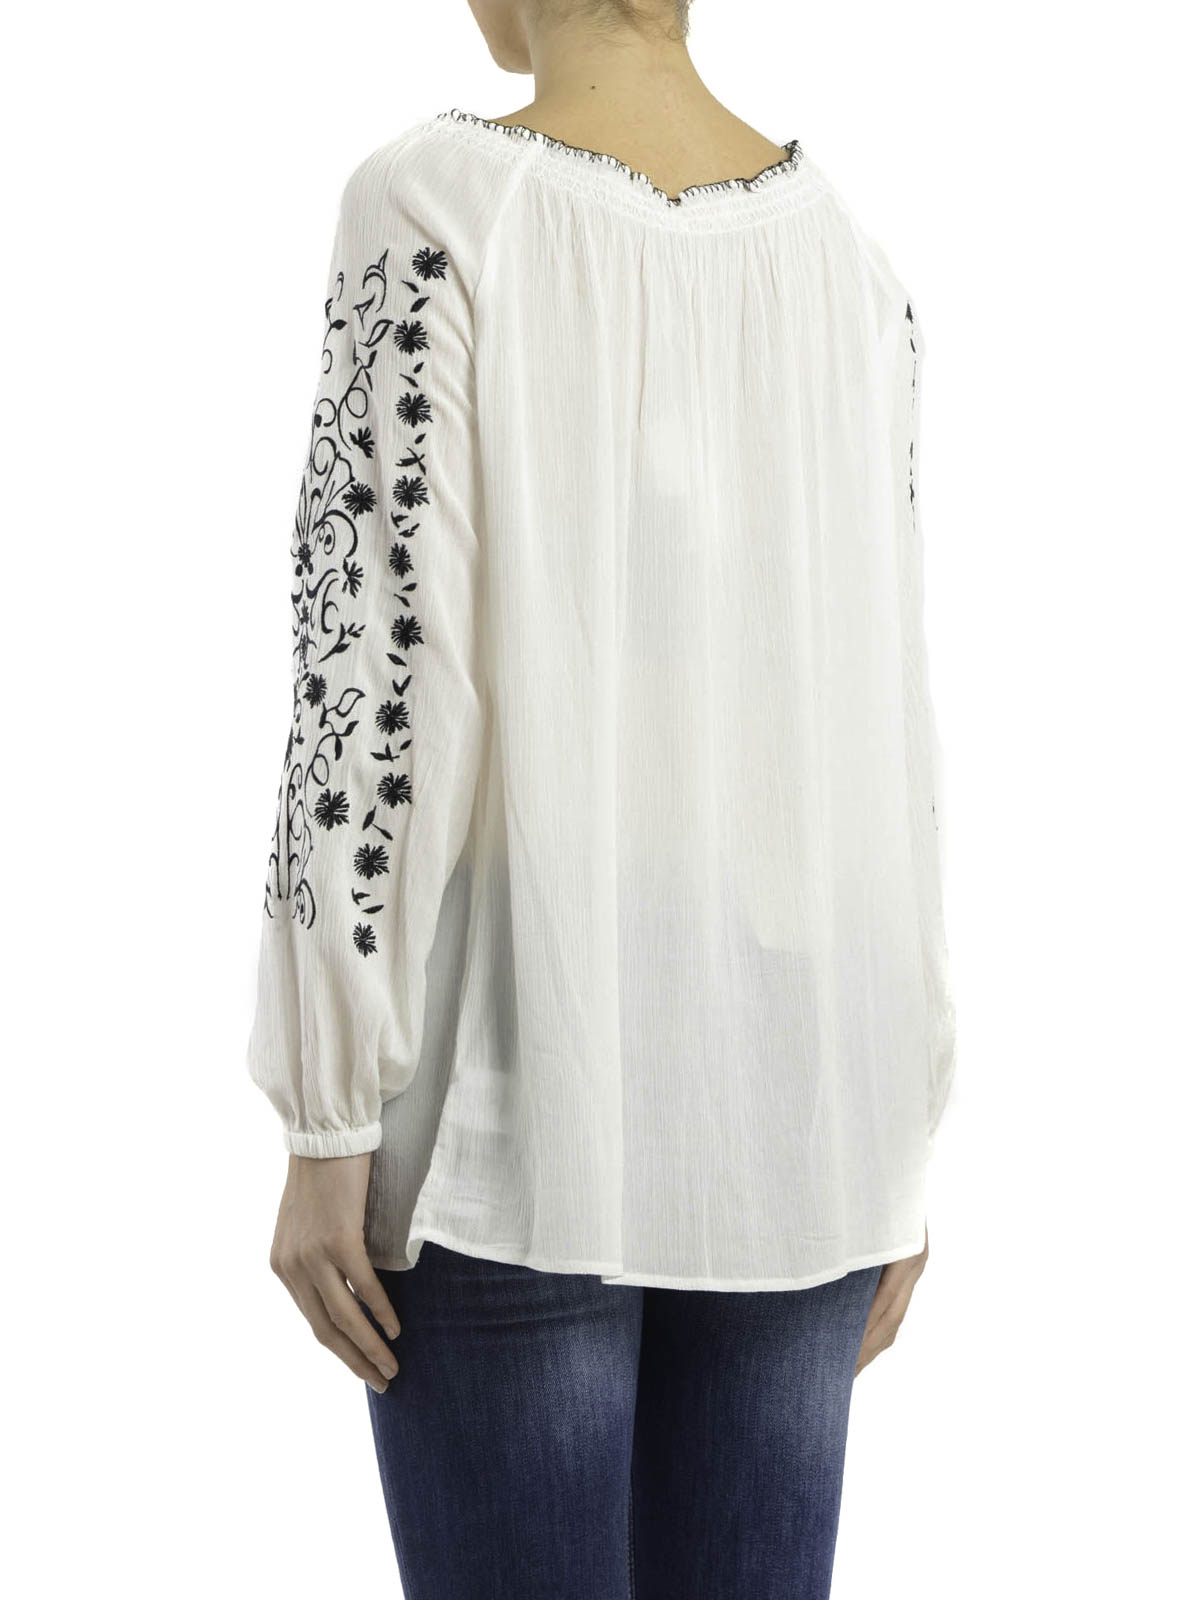 Blouses Tory Burch - Embroidered gauze blouse - 51154610 